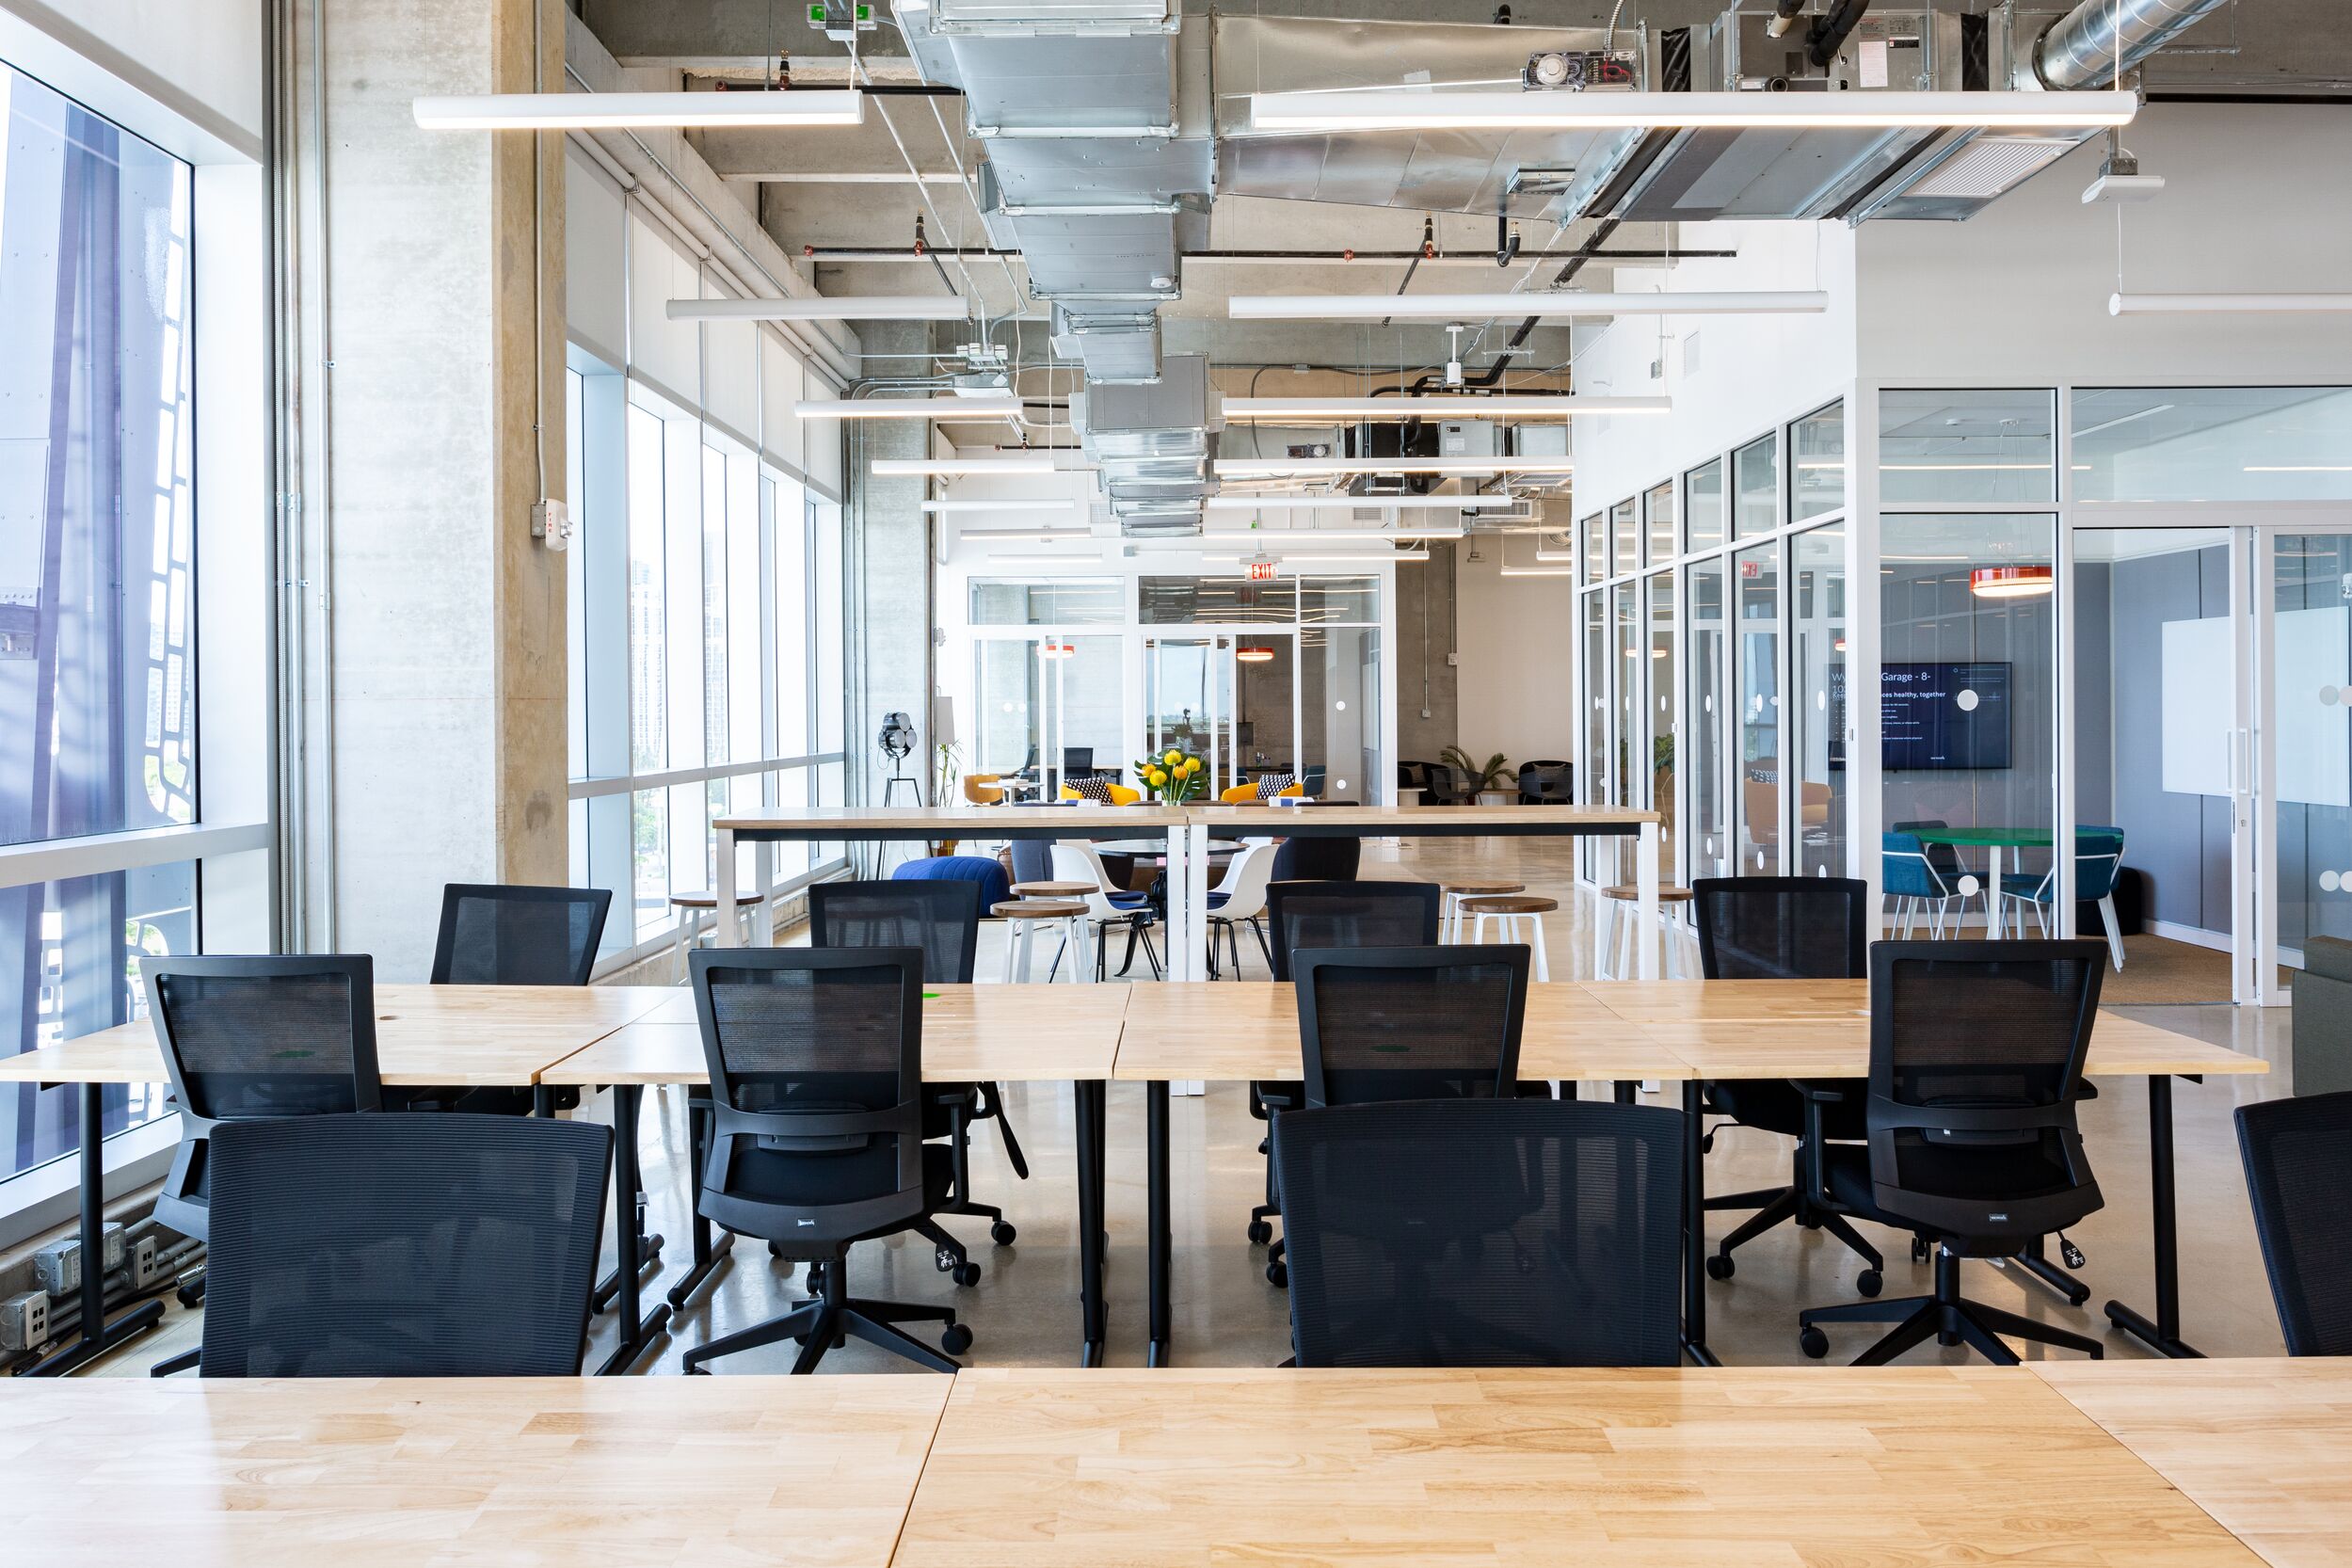 Shared Office Spaces vs. Co-Working Office Spaces